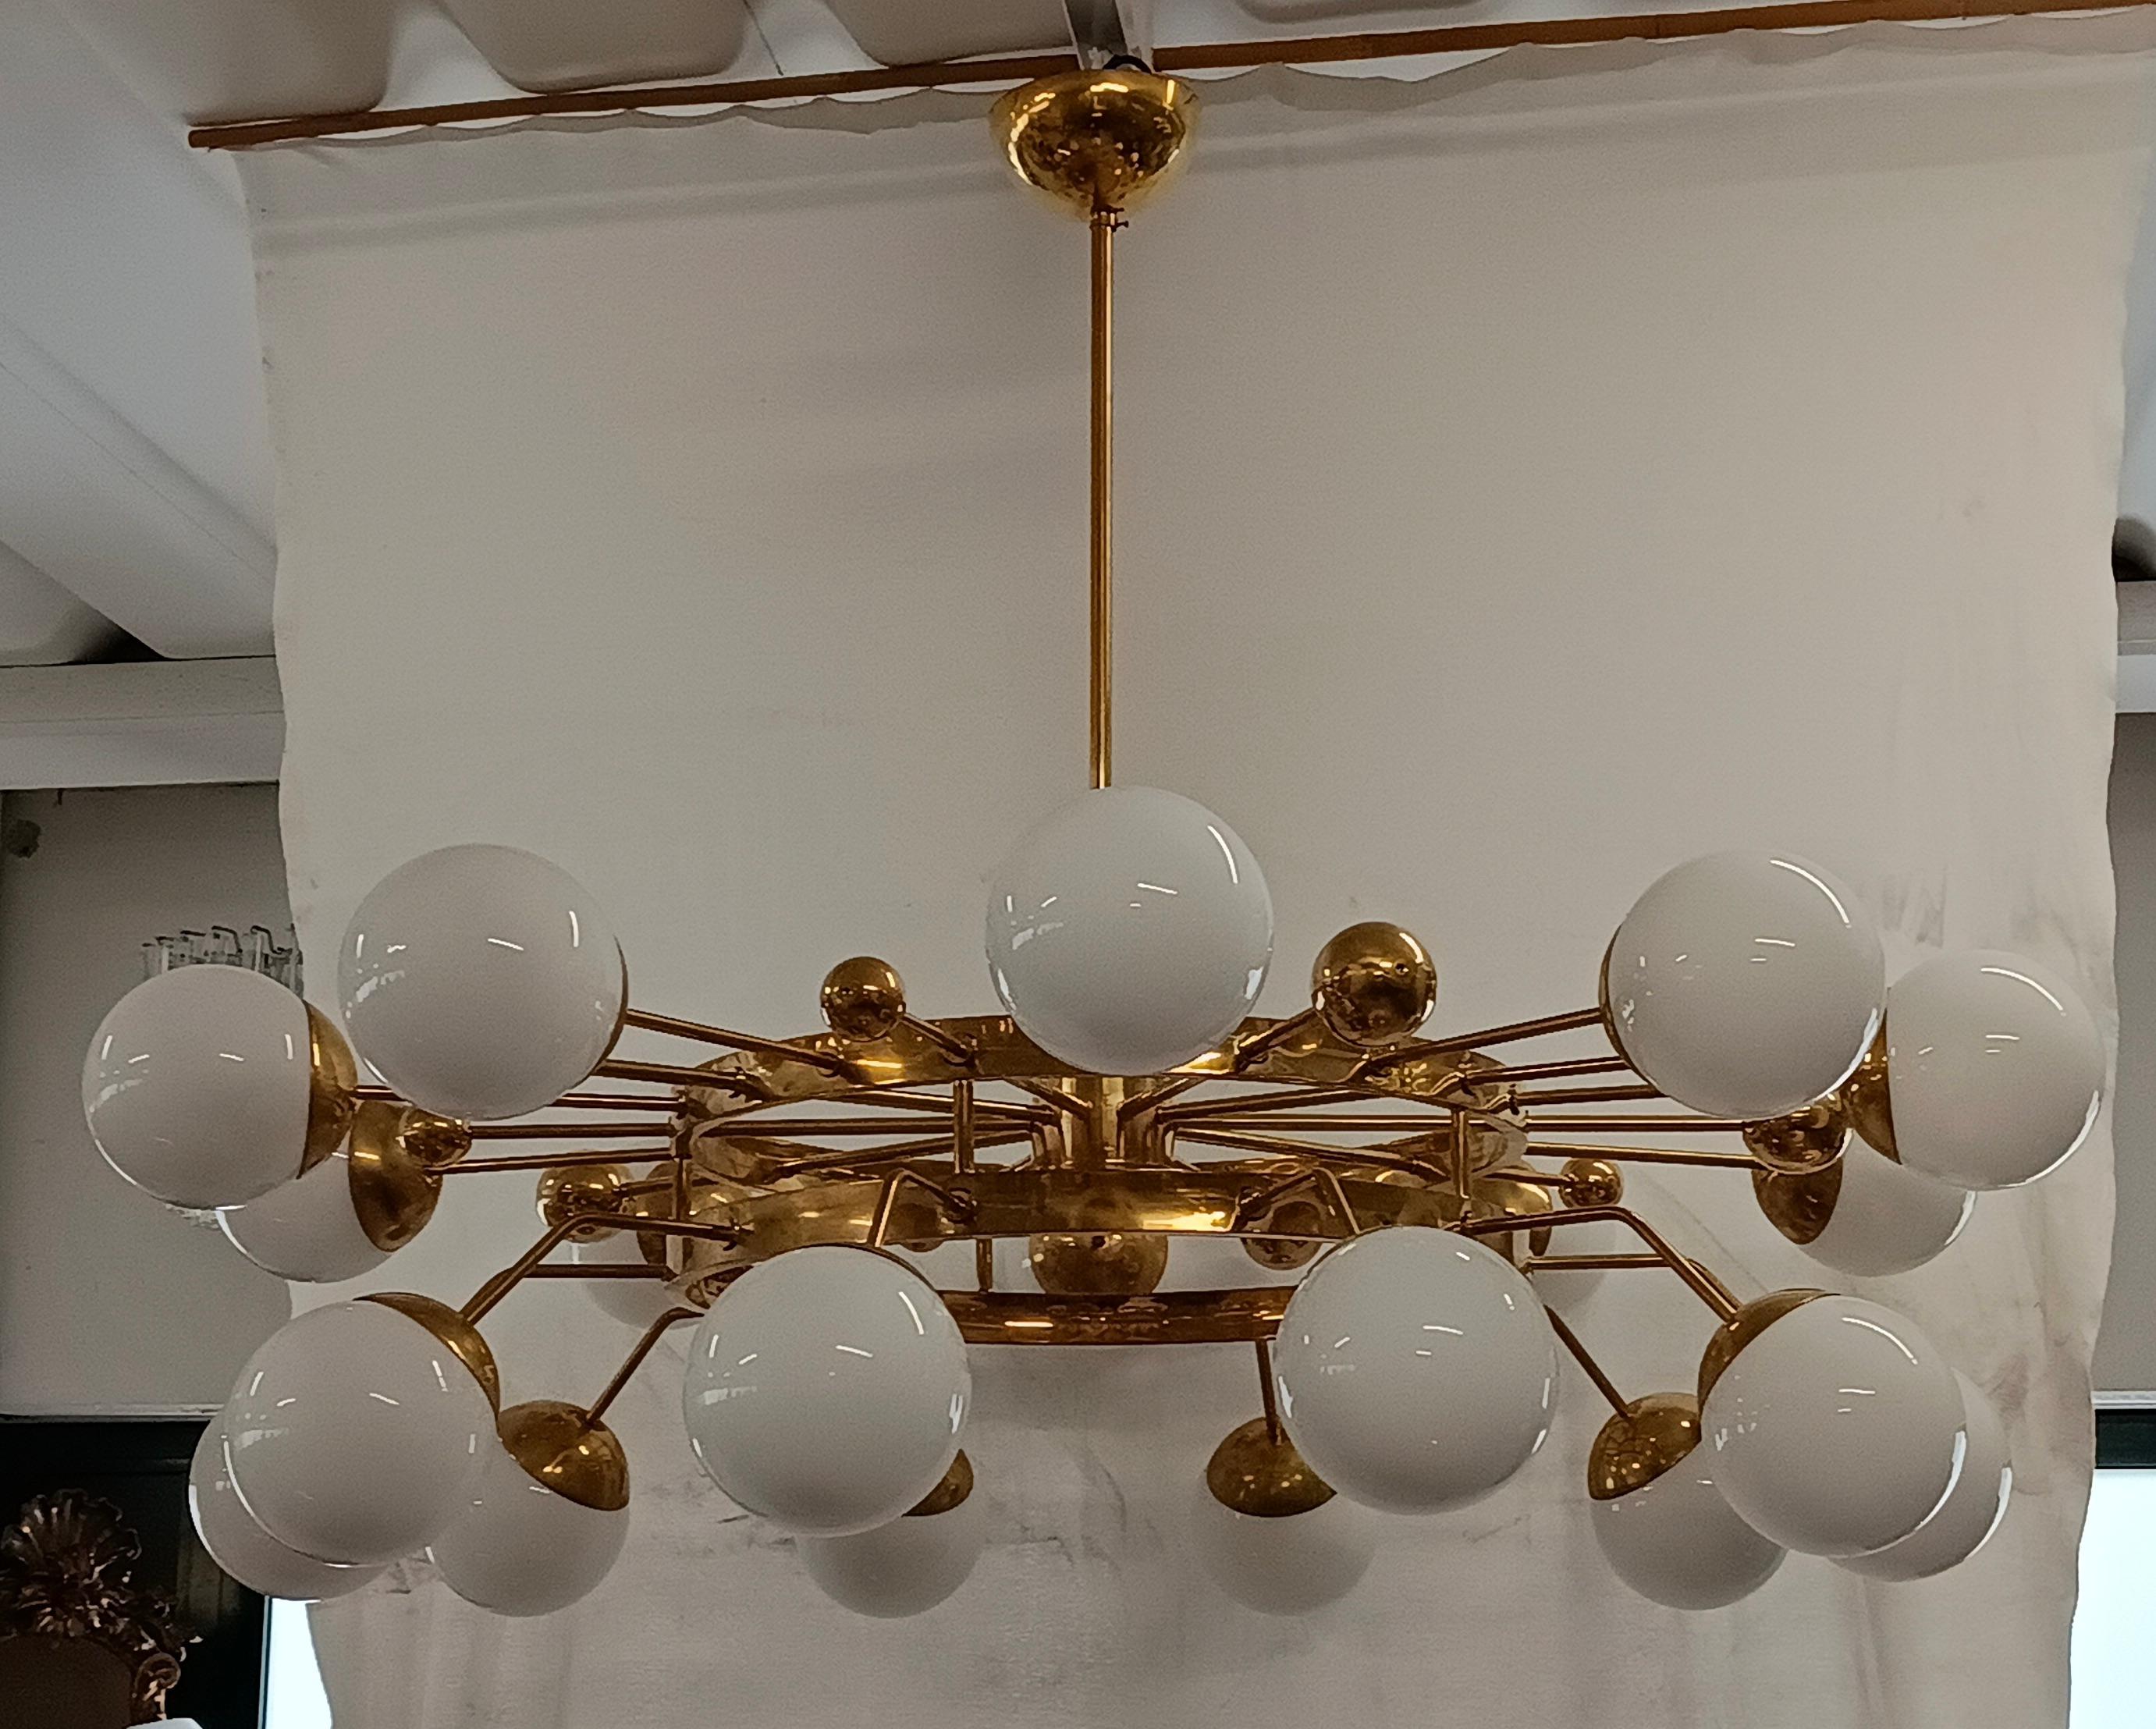 Particular circular sputnik, with brass structure and Murano glass spheres. It looks like a system of planets that gravitate circularly. A chandelier with a unique design of its kind, lots of brass and artistic white glass.

Chandelier with all